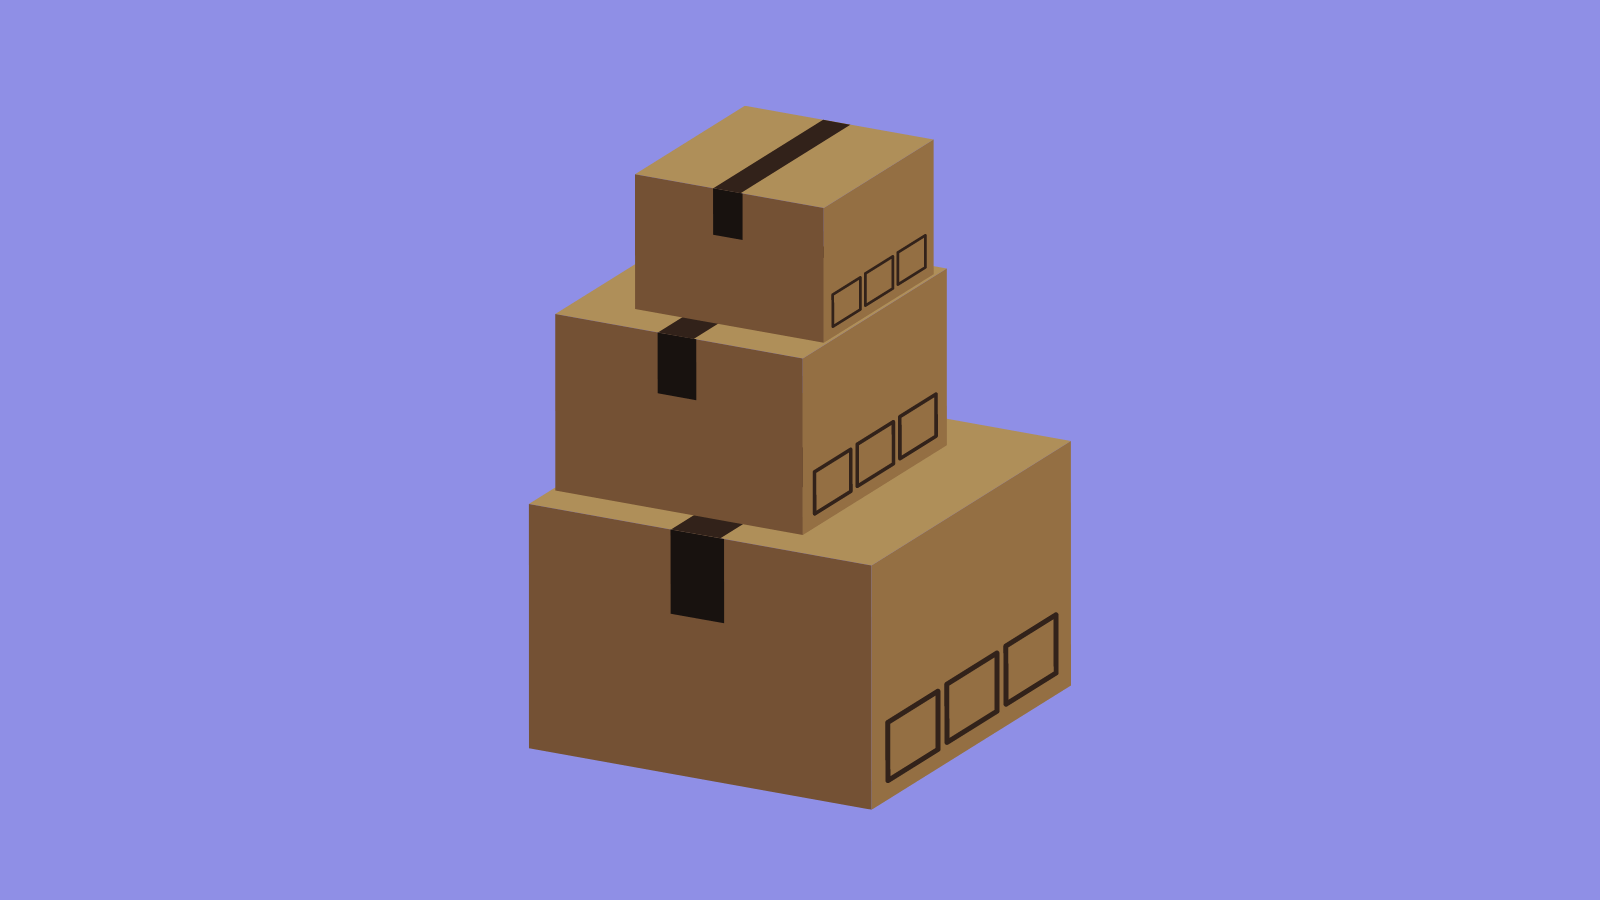 A stack of three cardboard boxes of different sizes